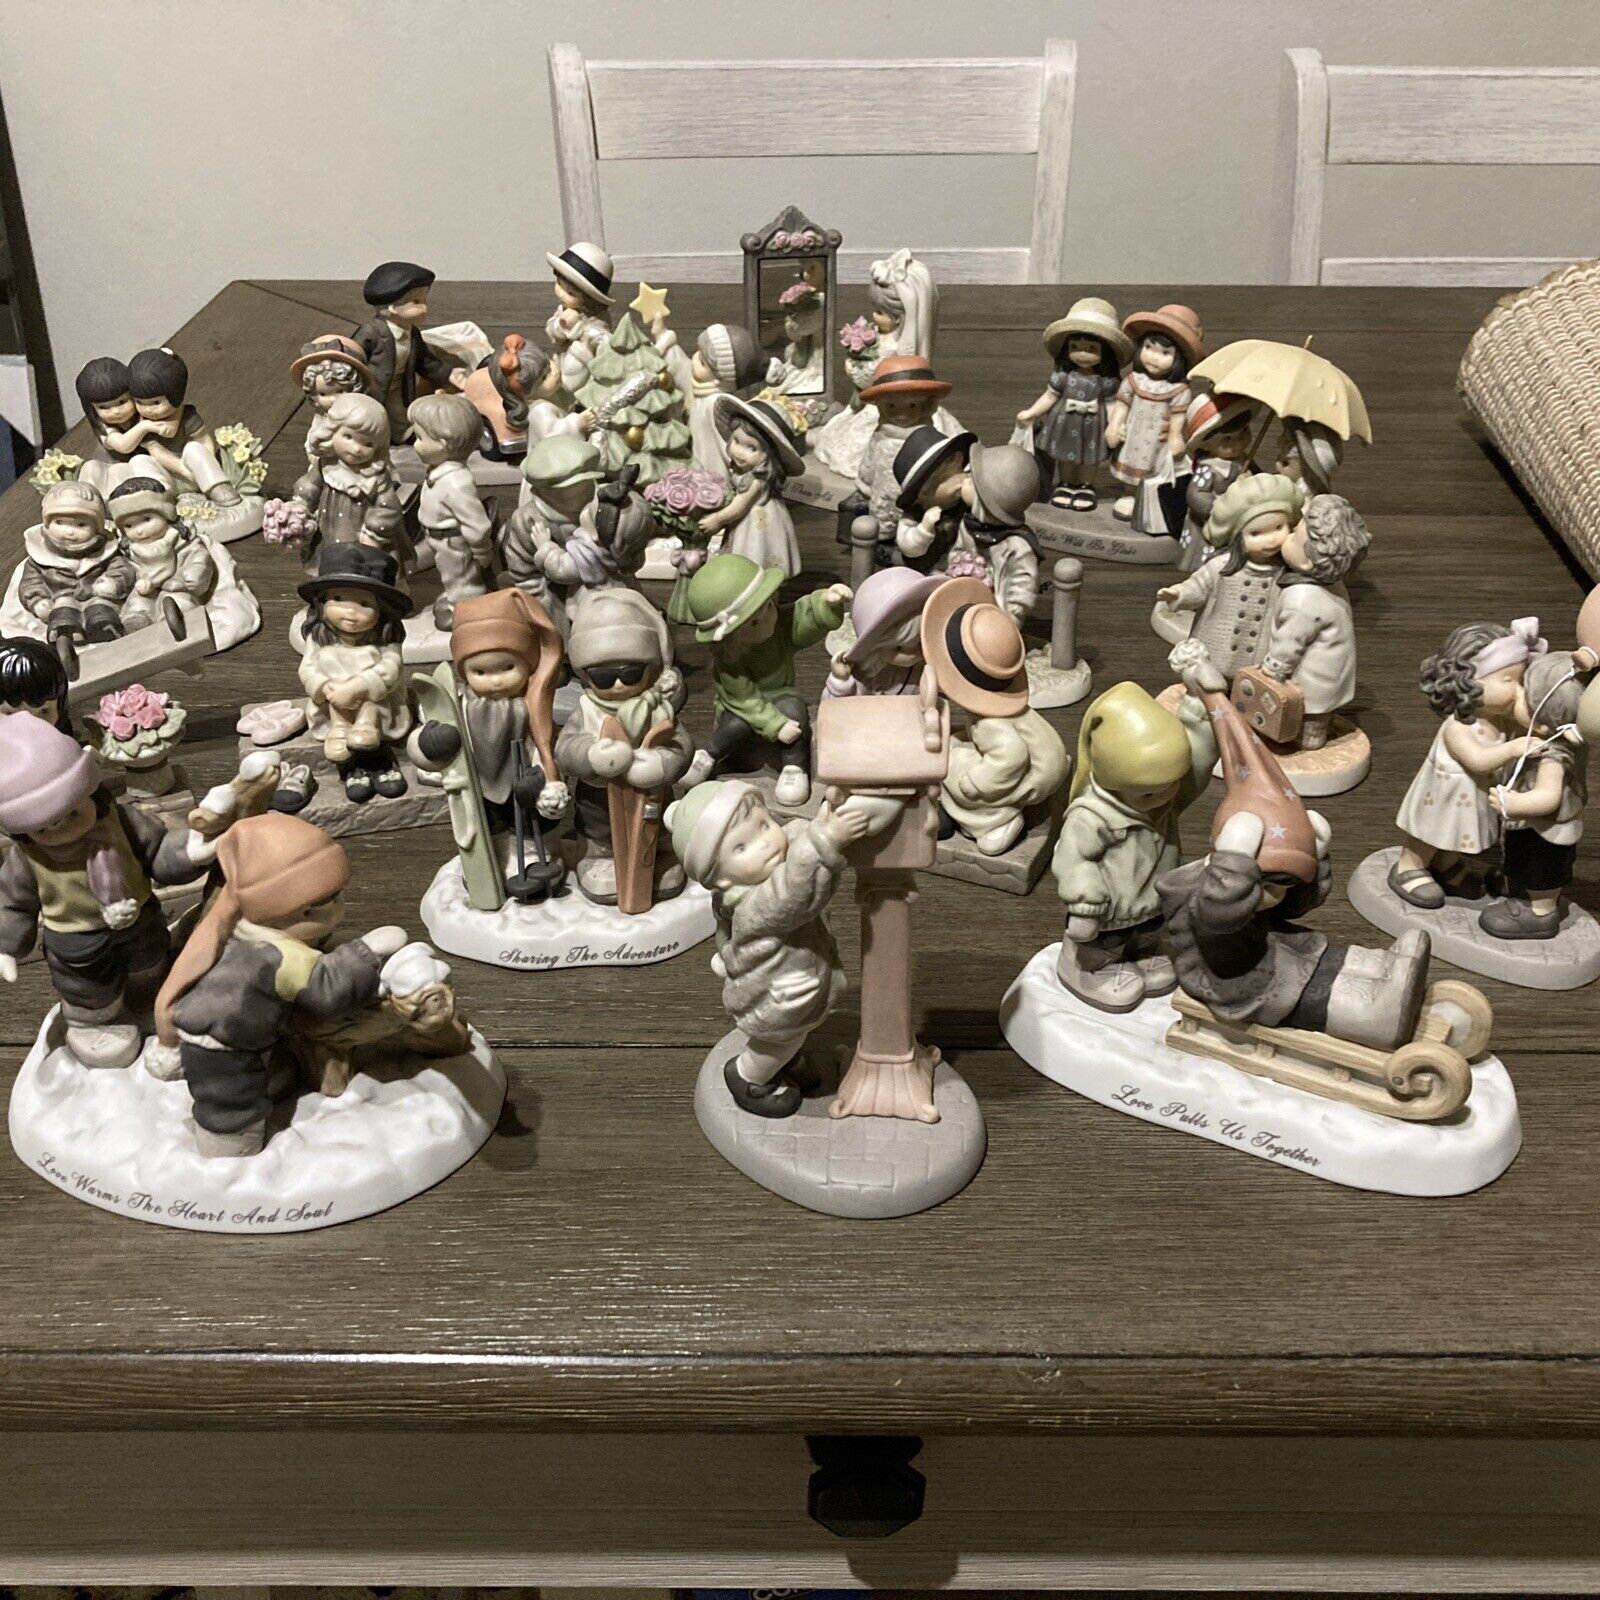 Kim Anderson / Enesco Figurine Collection. All Different and Different Years.